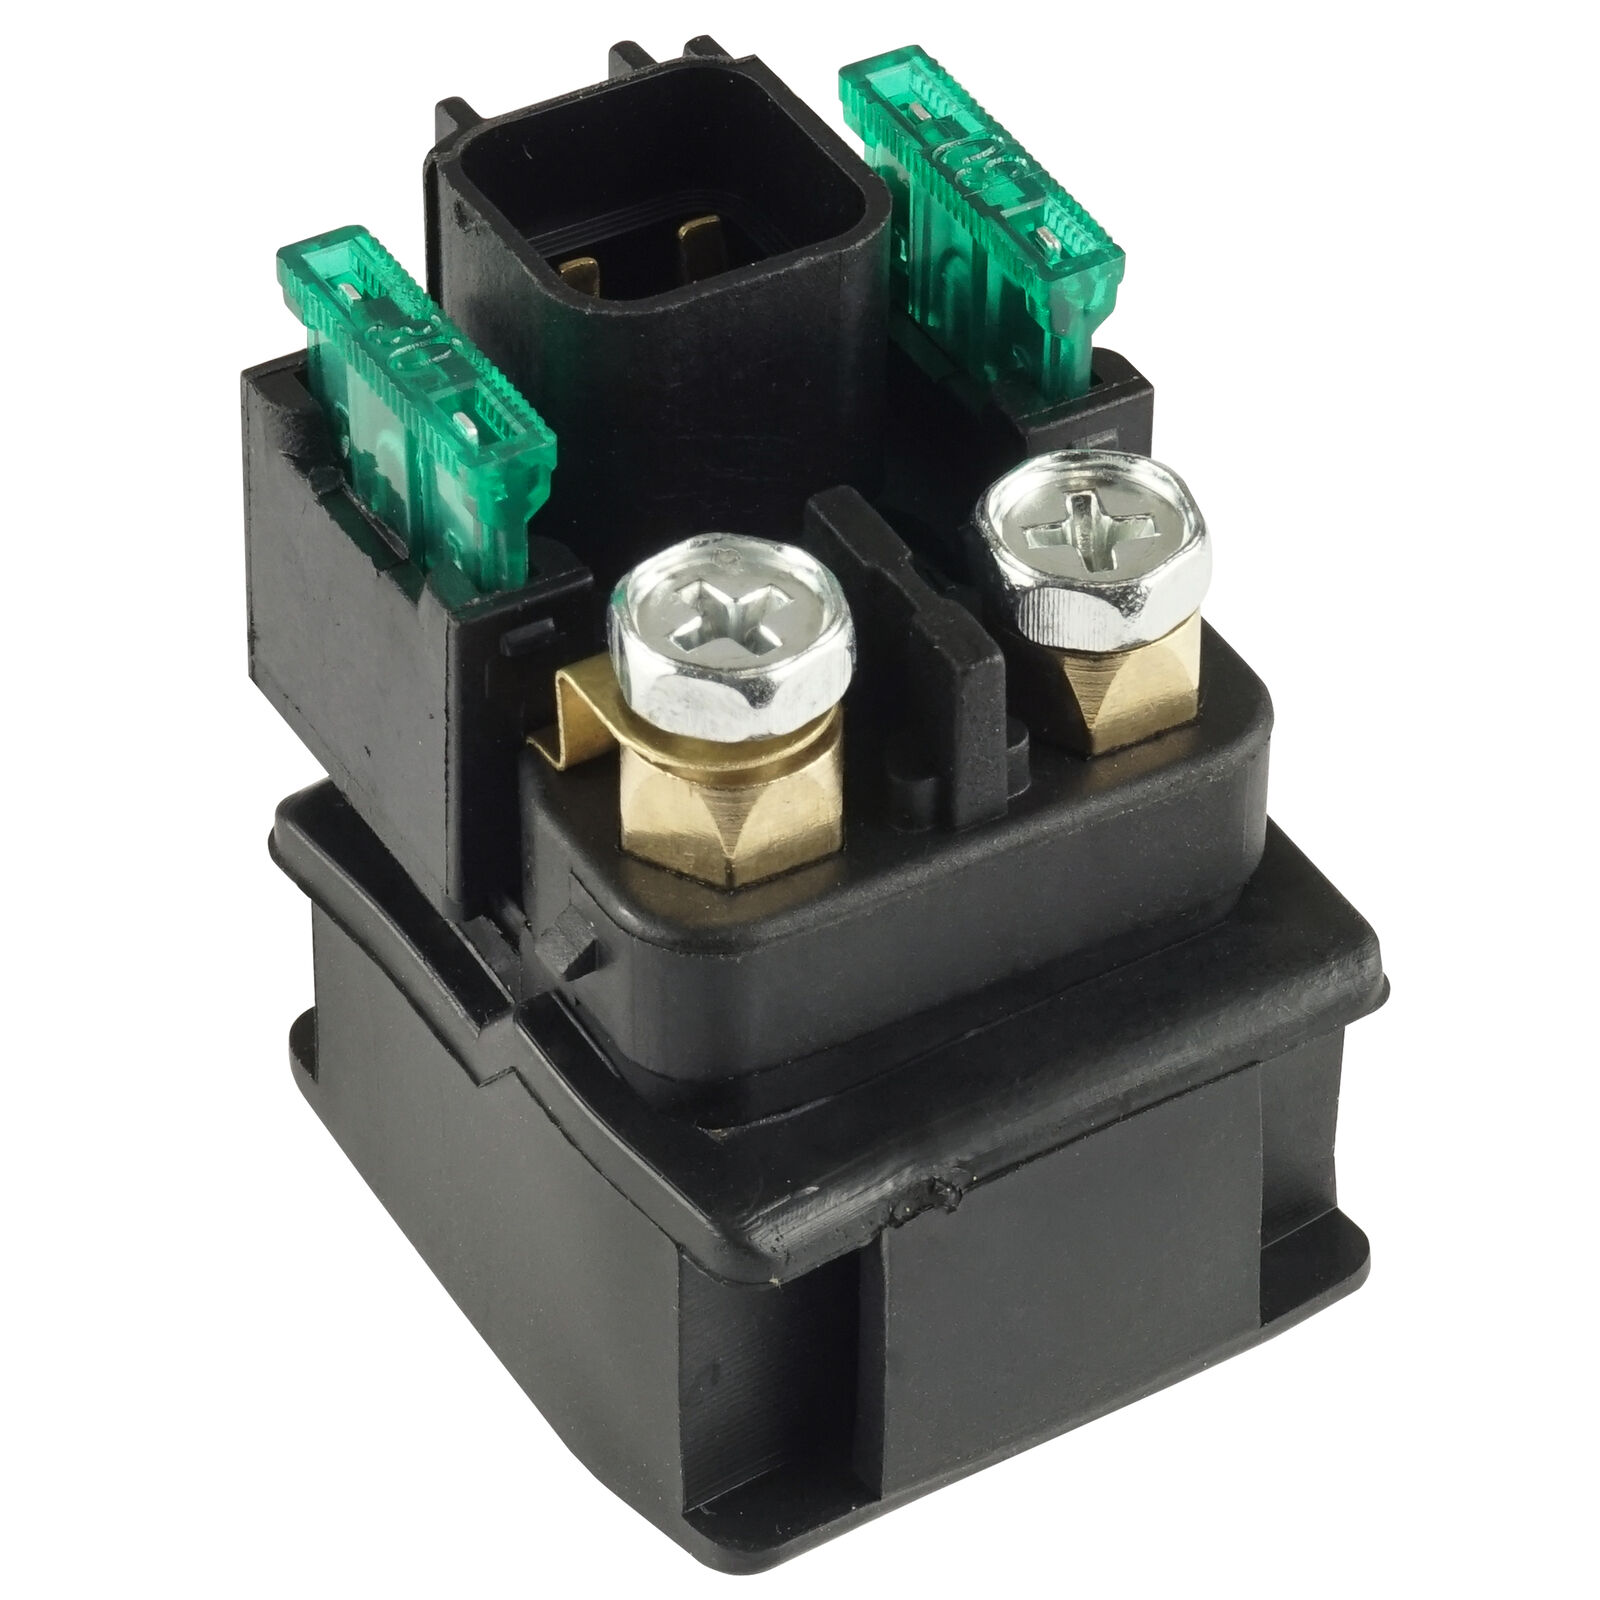 Caltric Starter Relay Solenoid for Suzuki 31800-21E20 Relay Starter Motorcycle - image 1 of 6